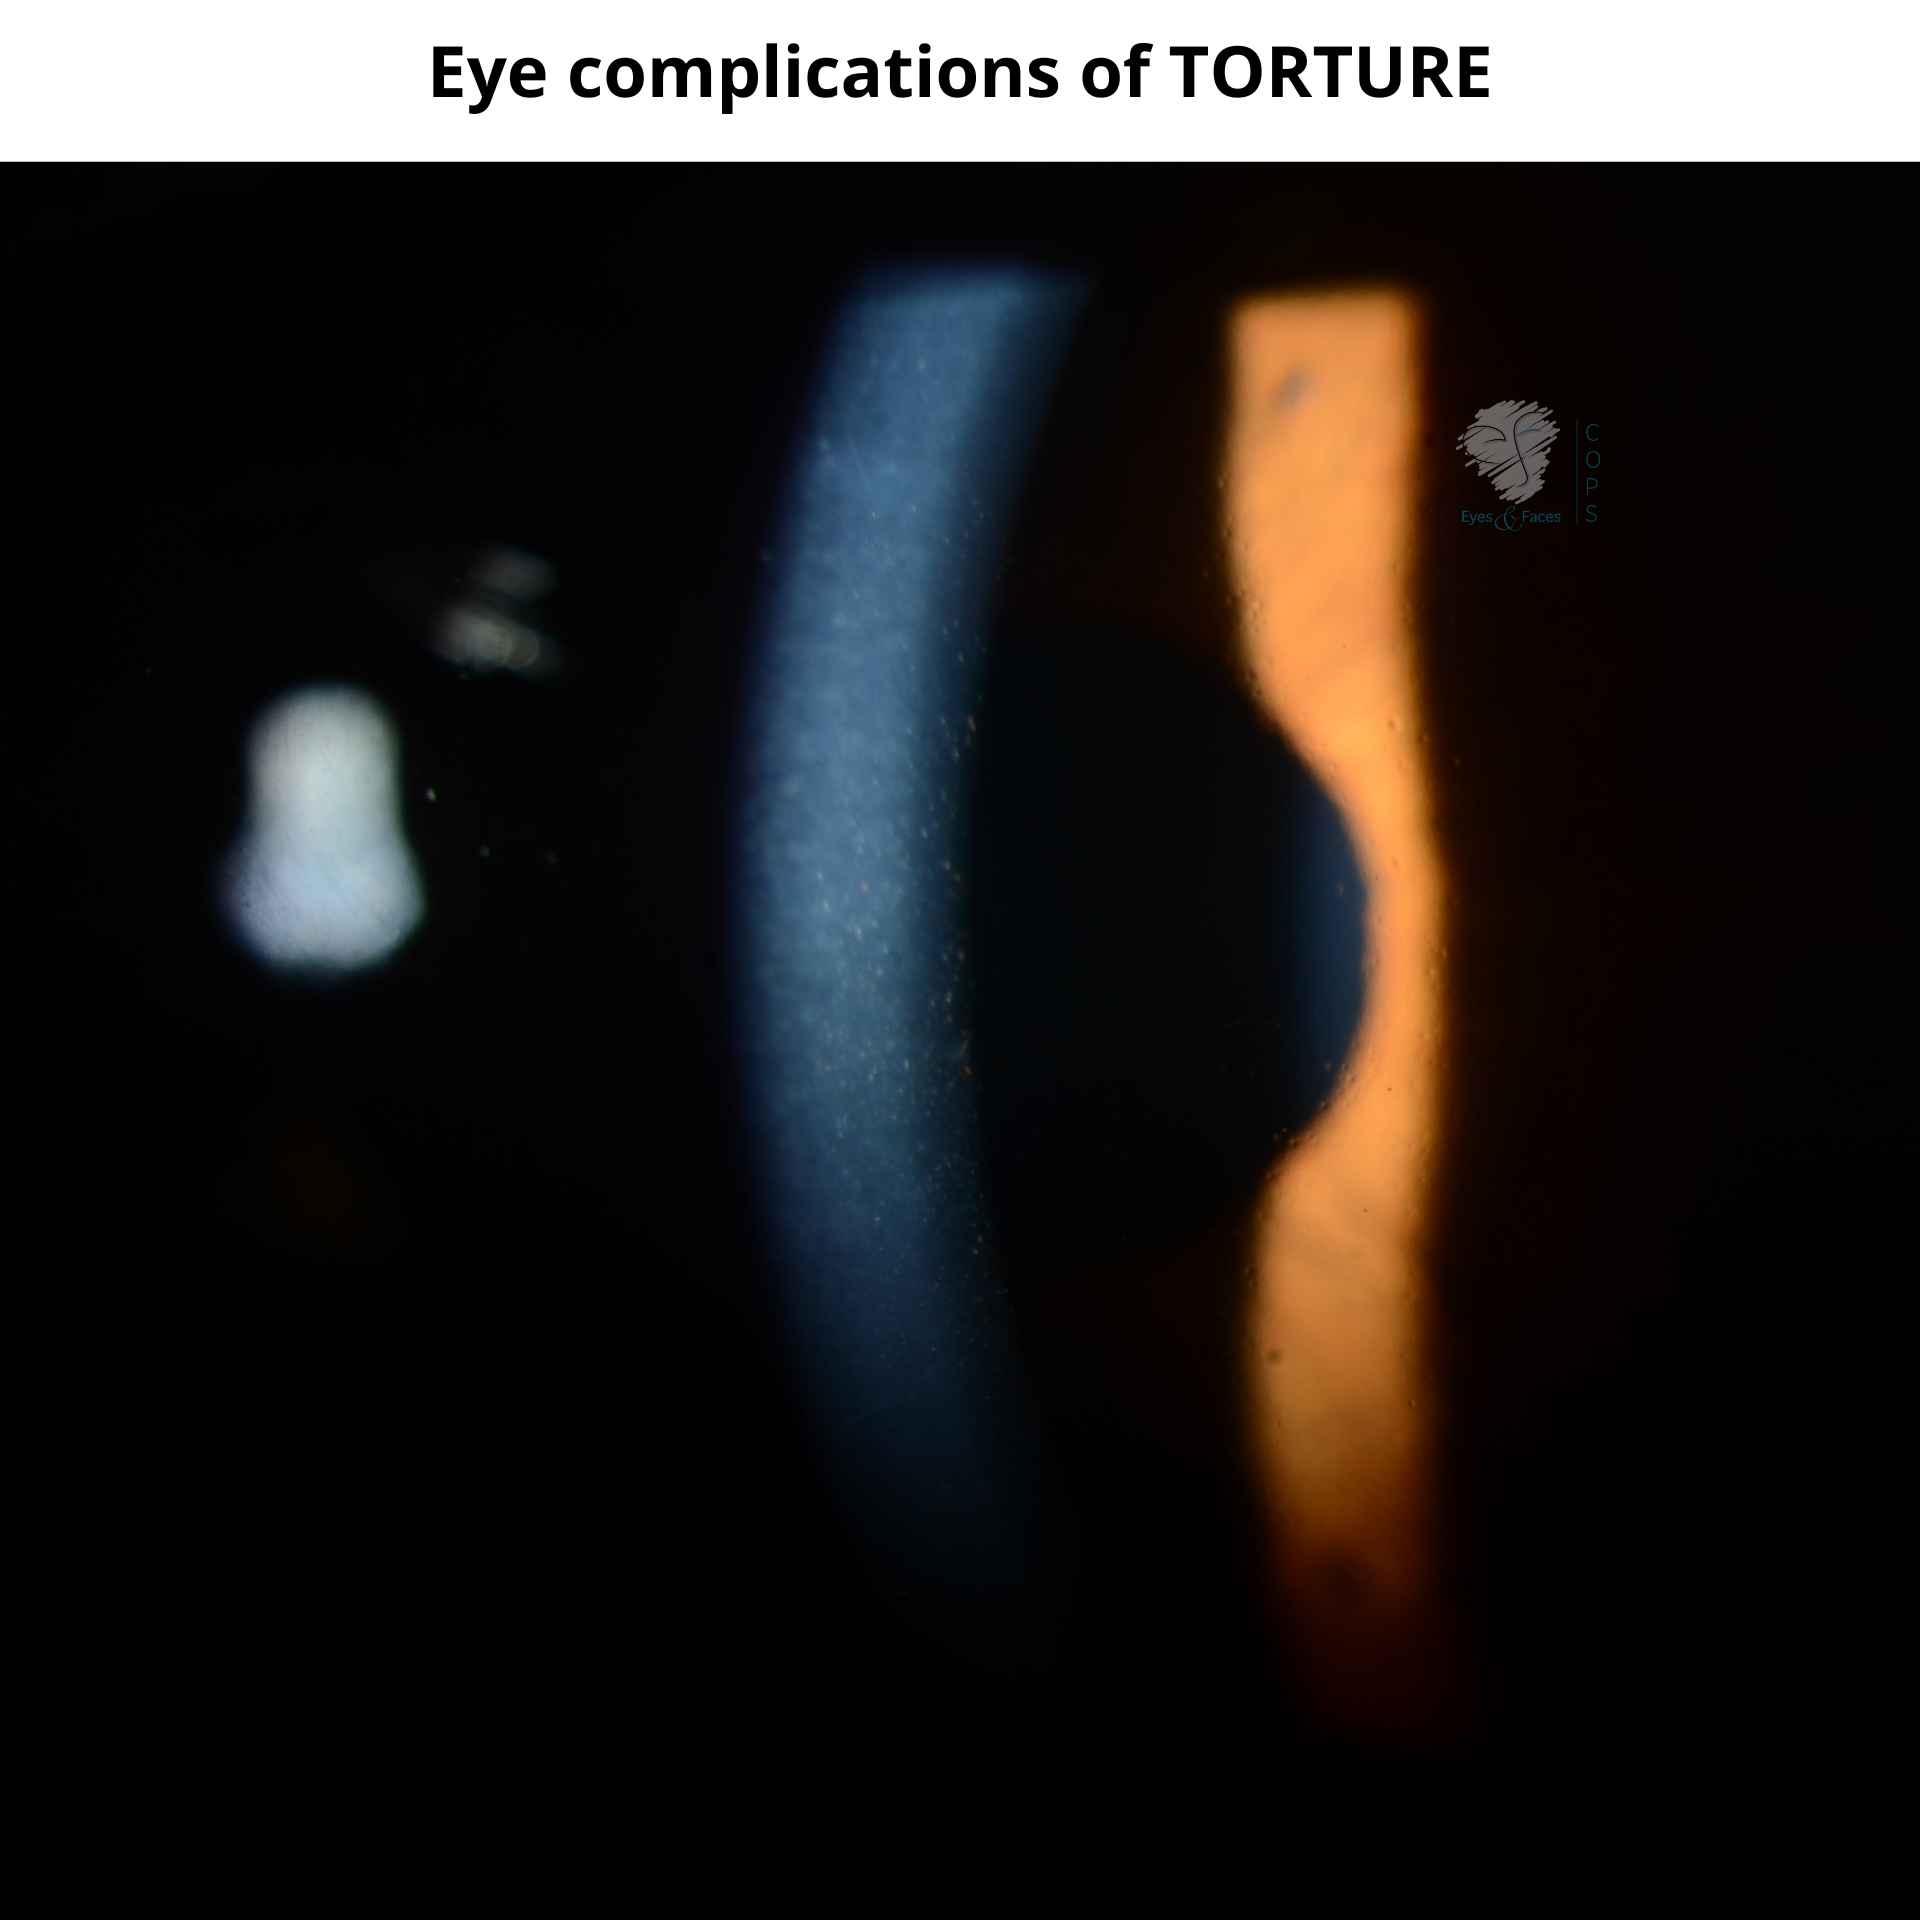 Eye complications of torture leading to damage of the cornea.